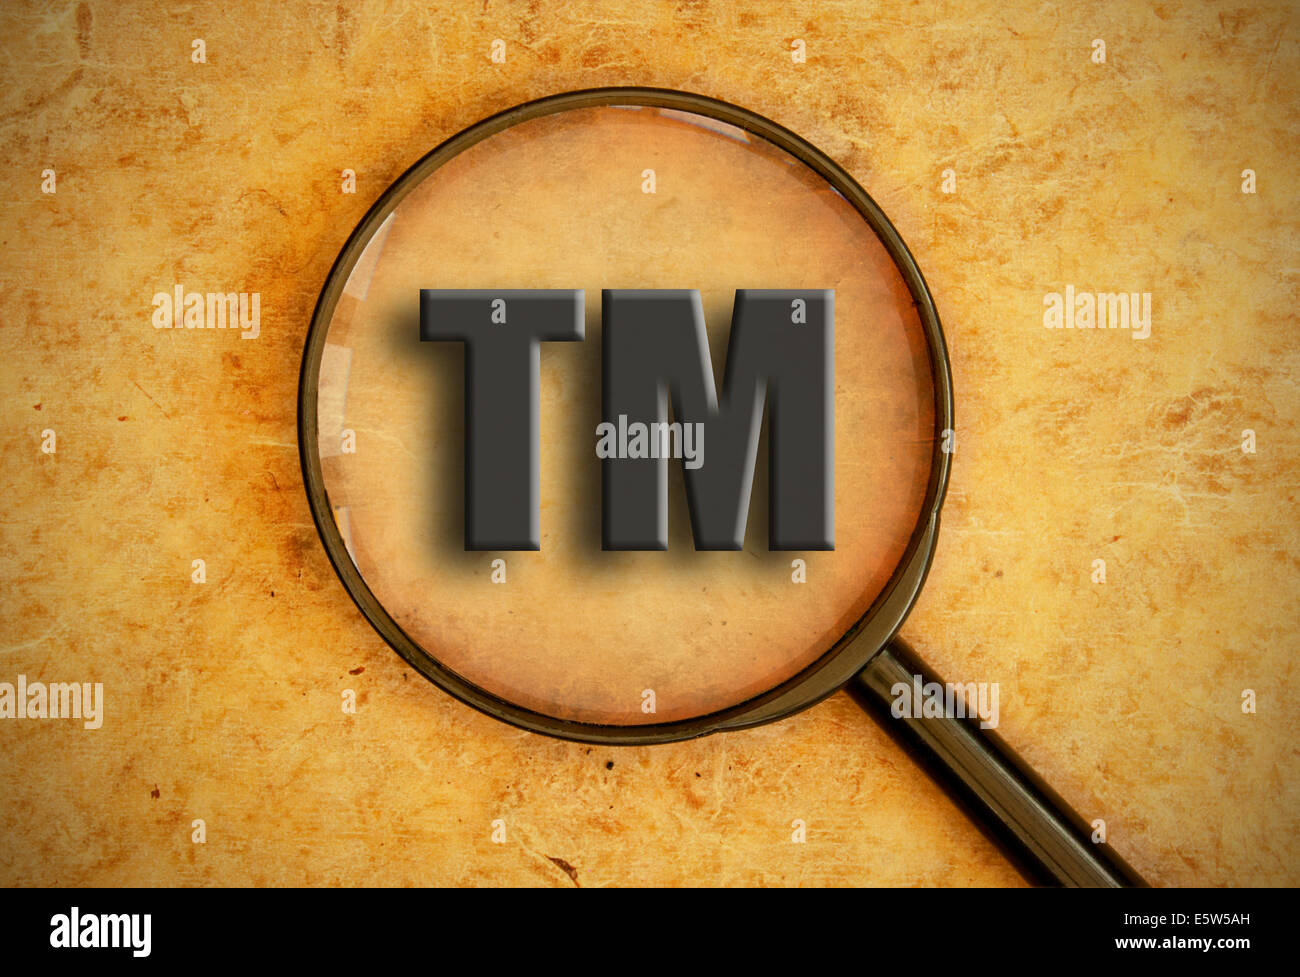 Magnifying glass focusing on trademark sign Stock Photo